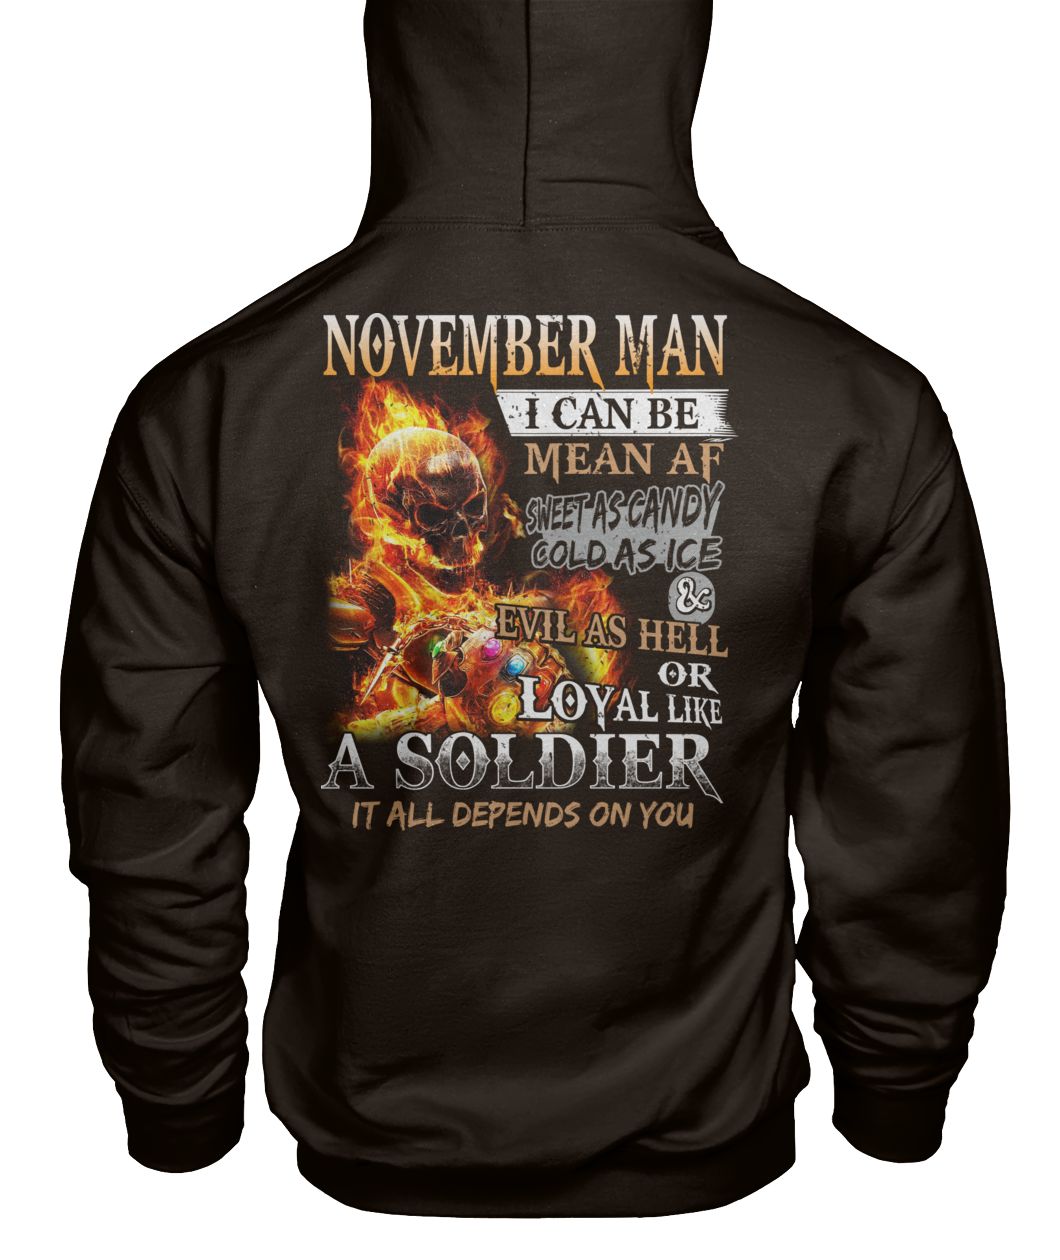 November man I can be mean af sweet as candy gold as ice and evil as hell gildan hoodie